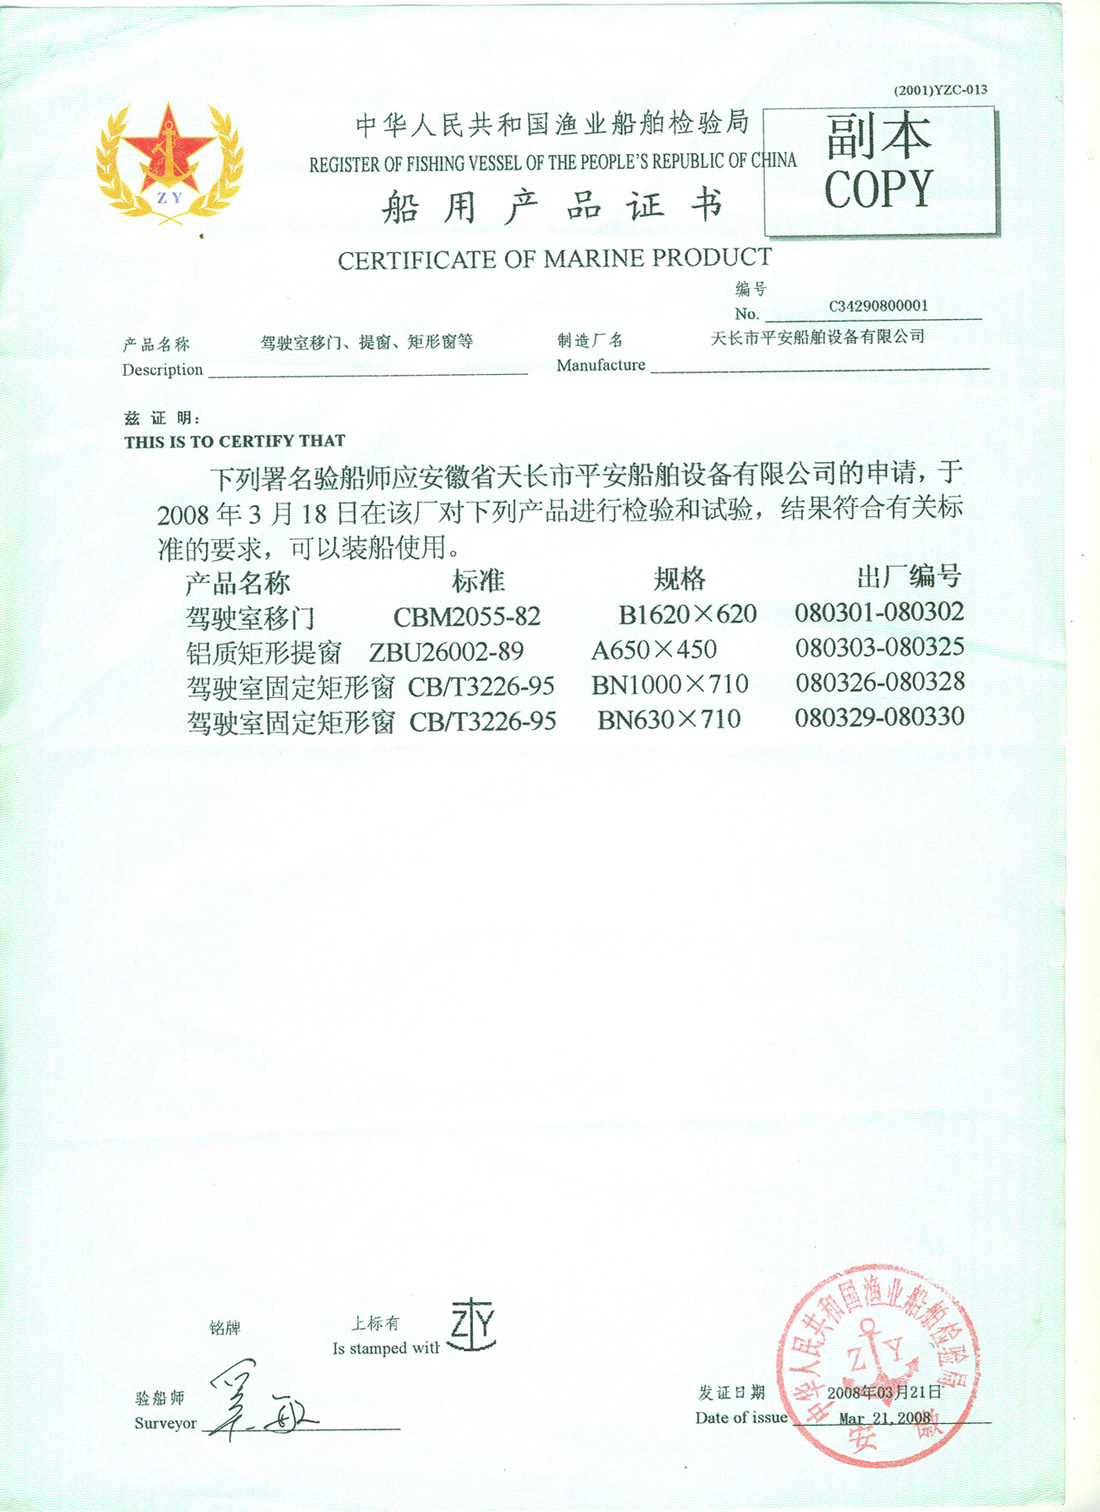 Certificate of Marine Products